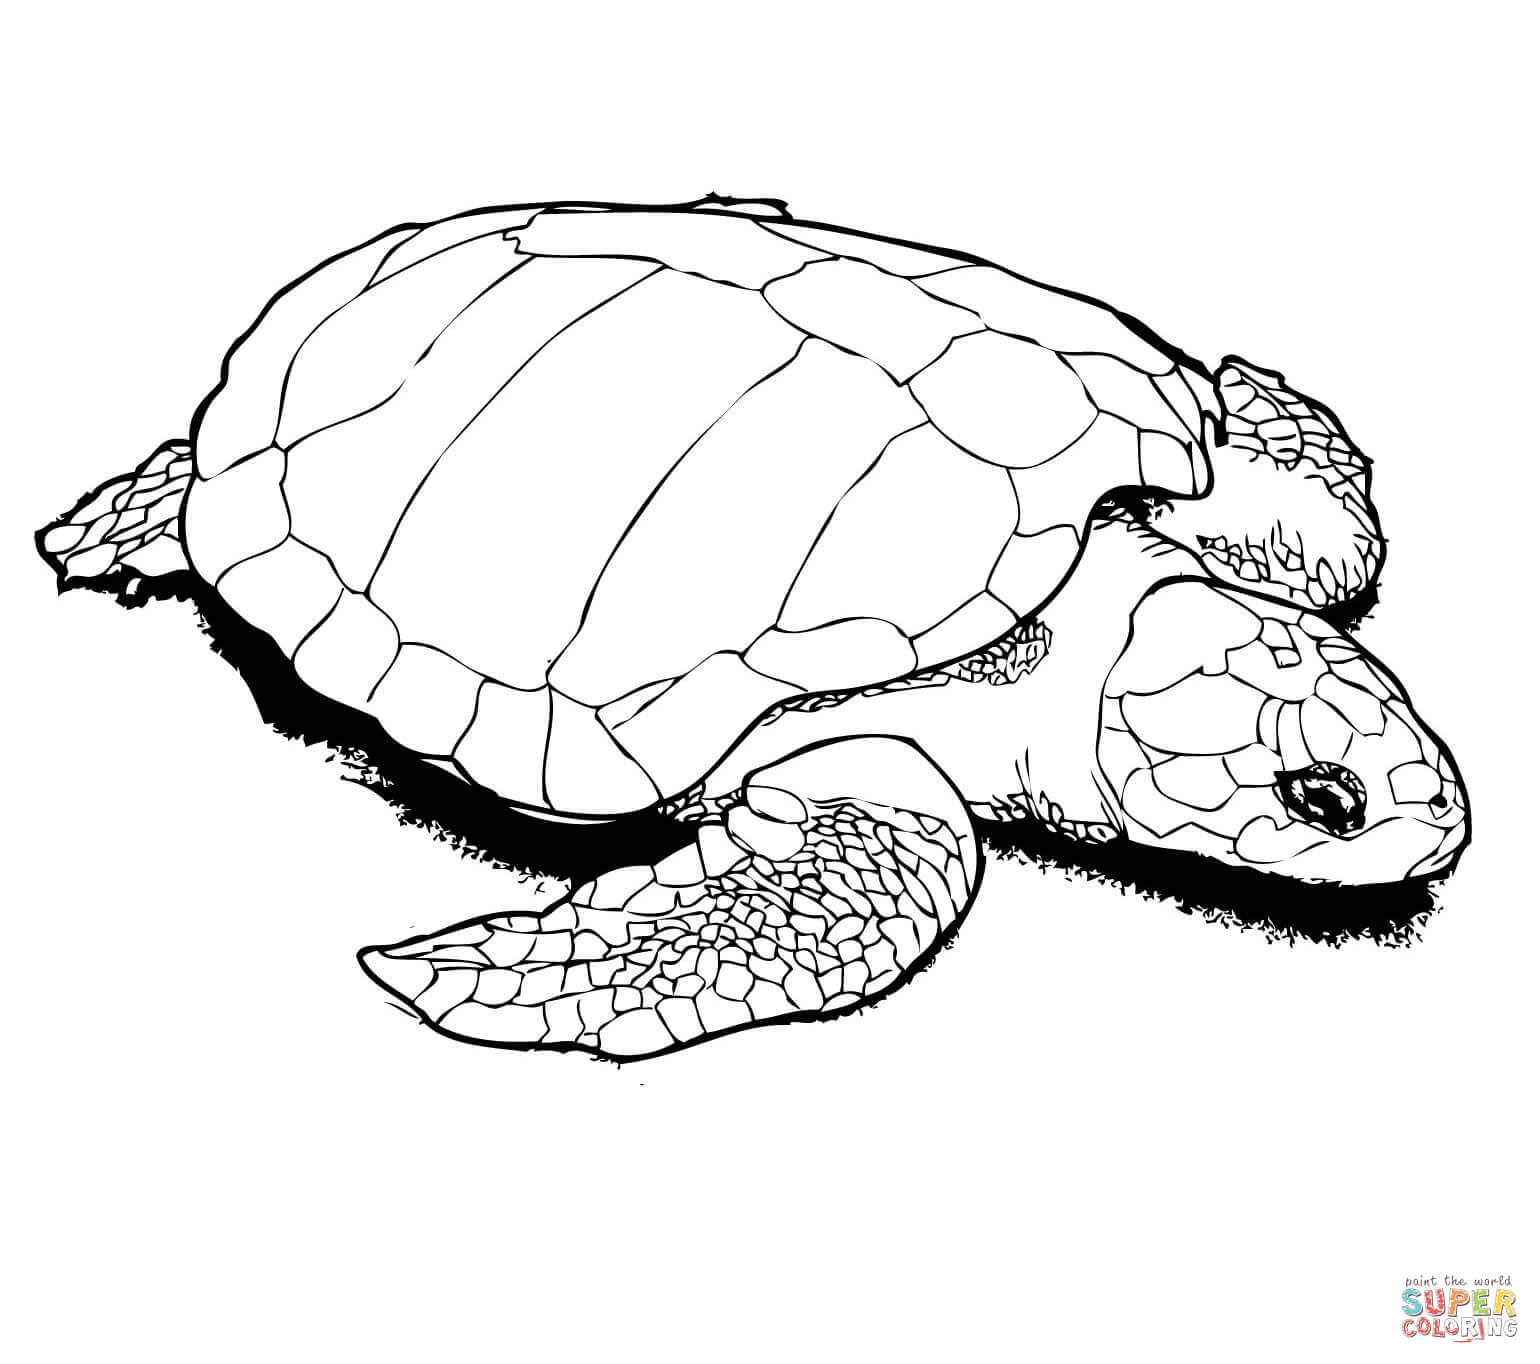 Snapping Turtle Coloring Pages at Free